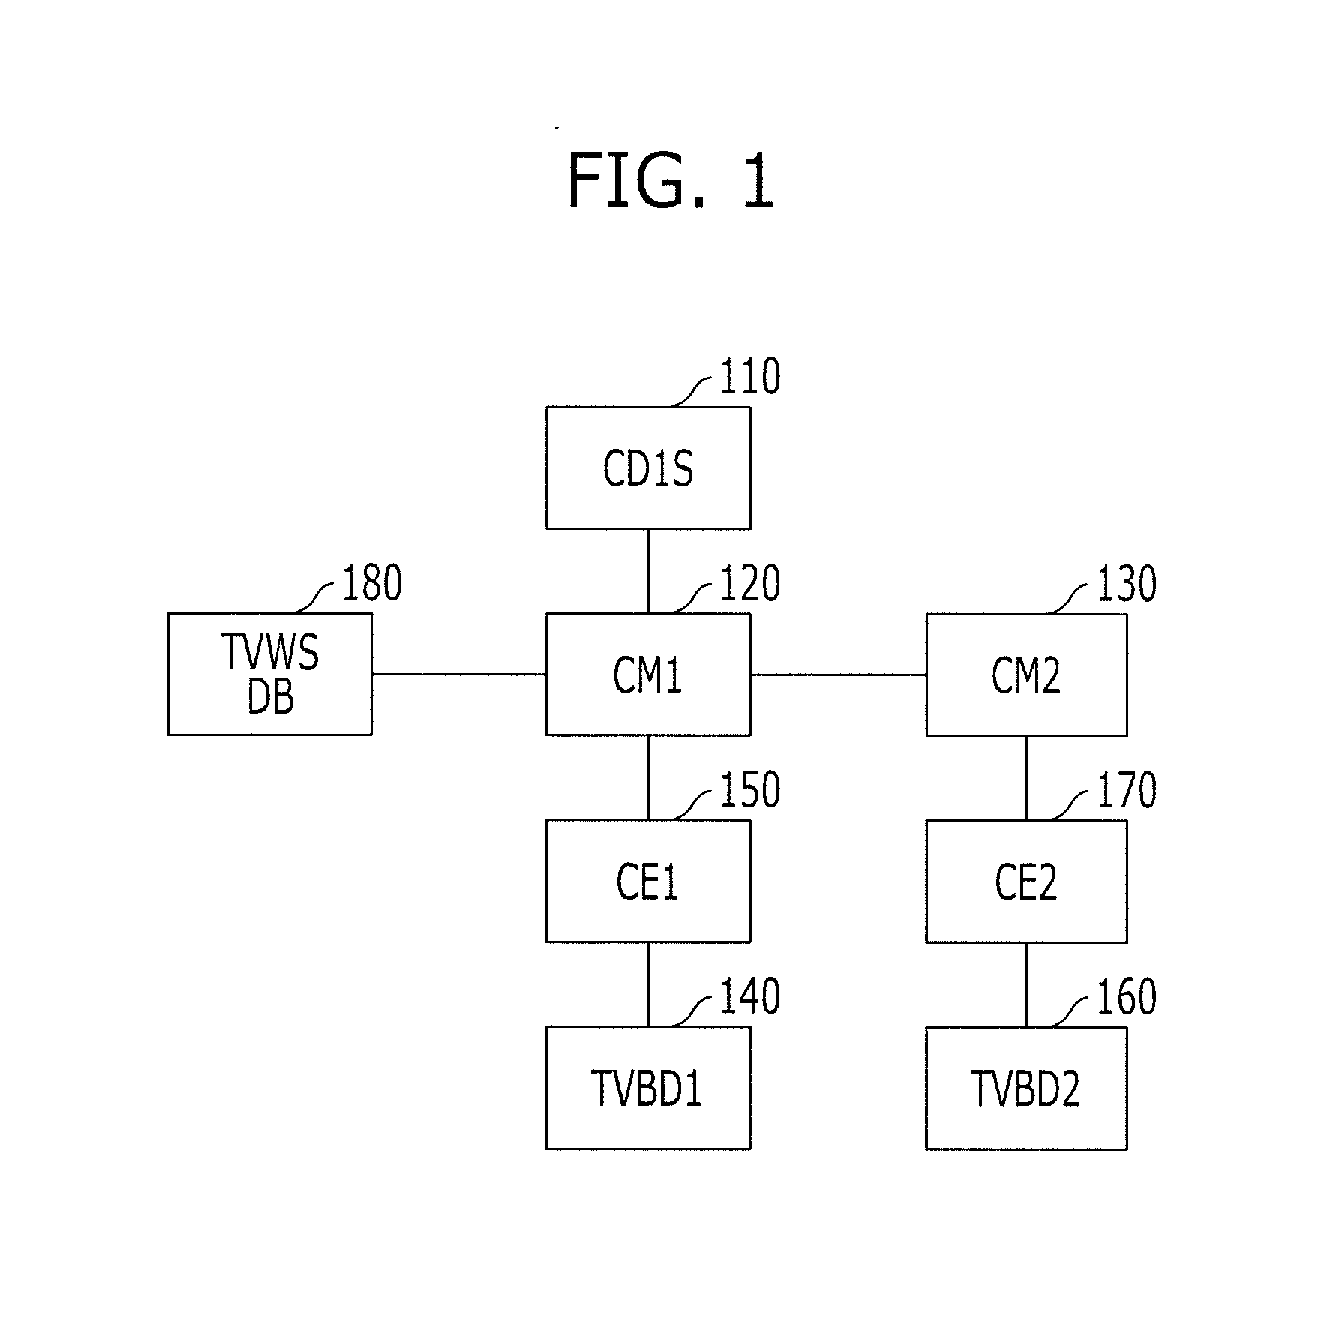 System and method for managing resource in communication system